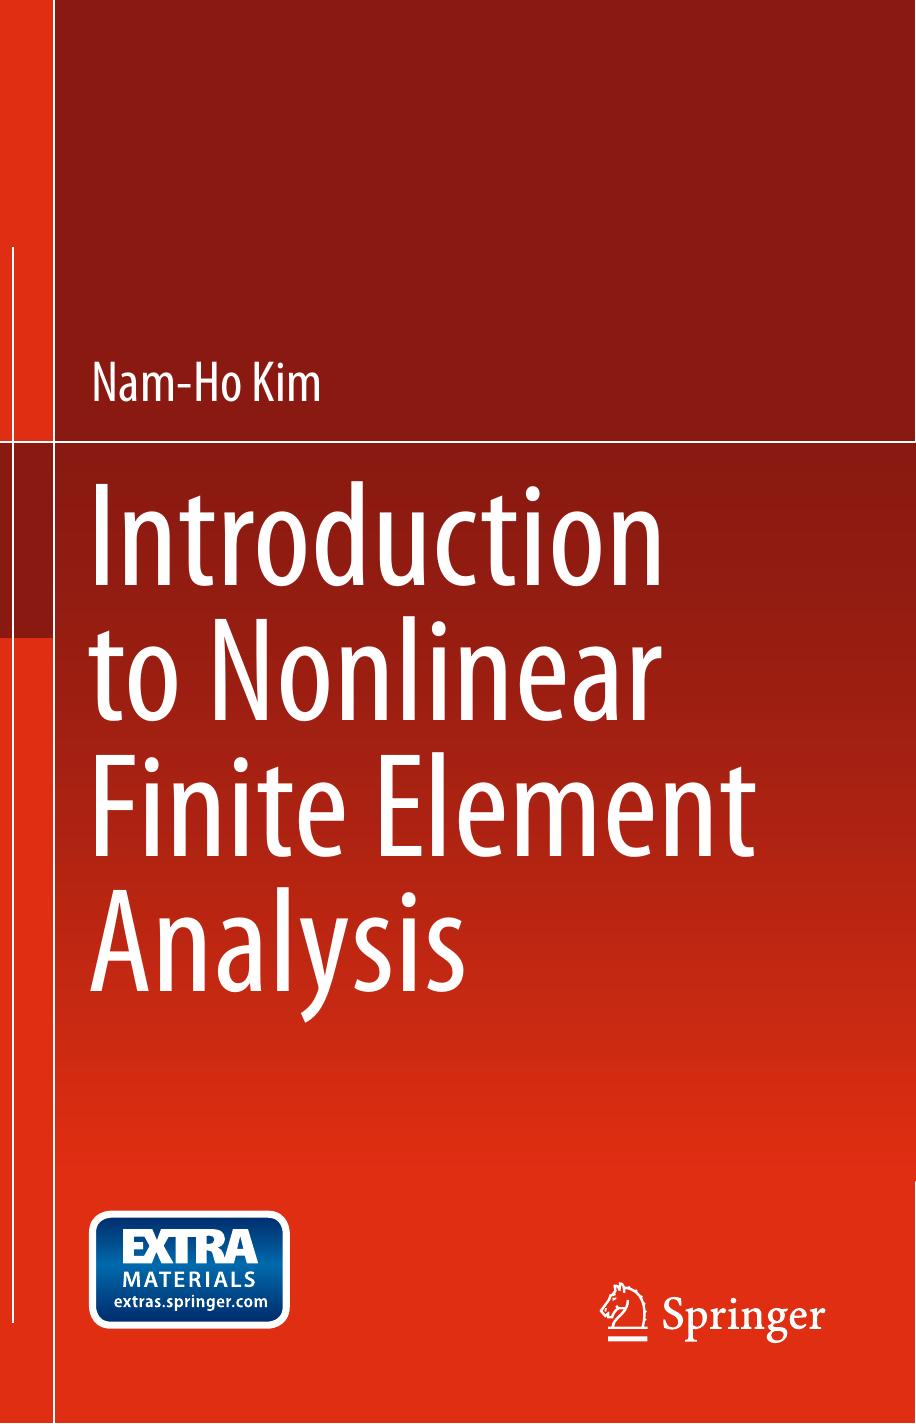 Introduction to Nonlinear Finite Element Analysis by Nam-Ho Kim